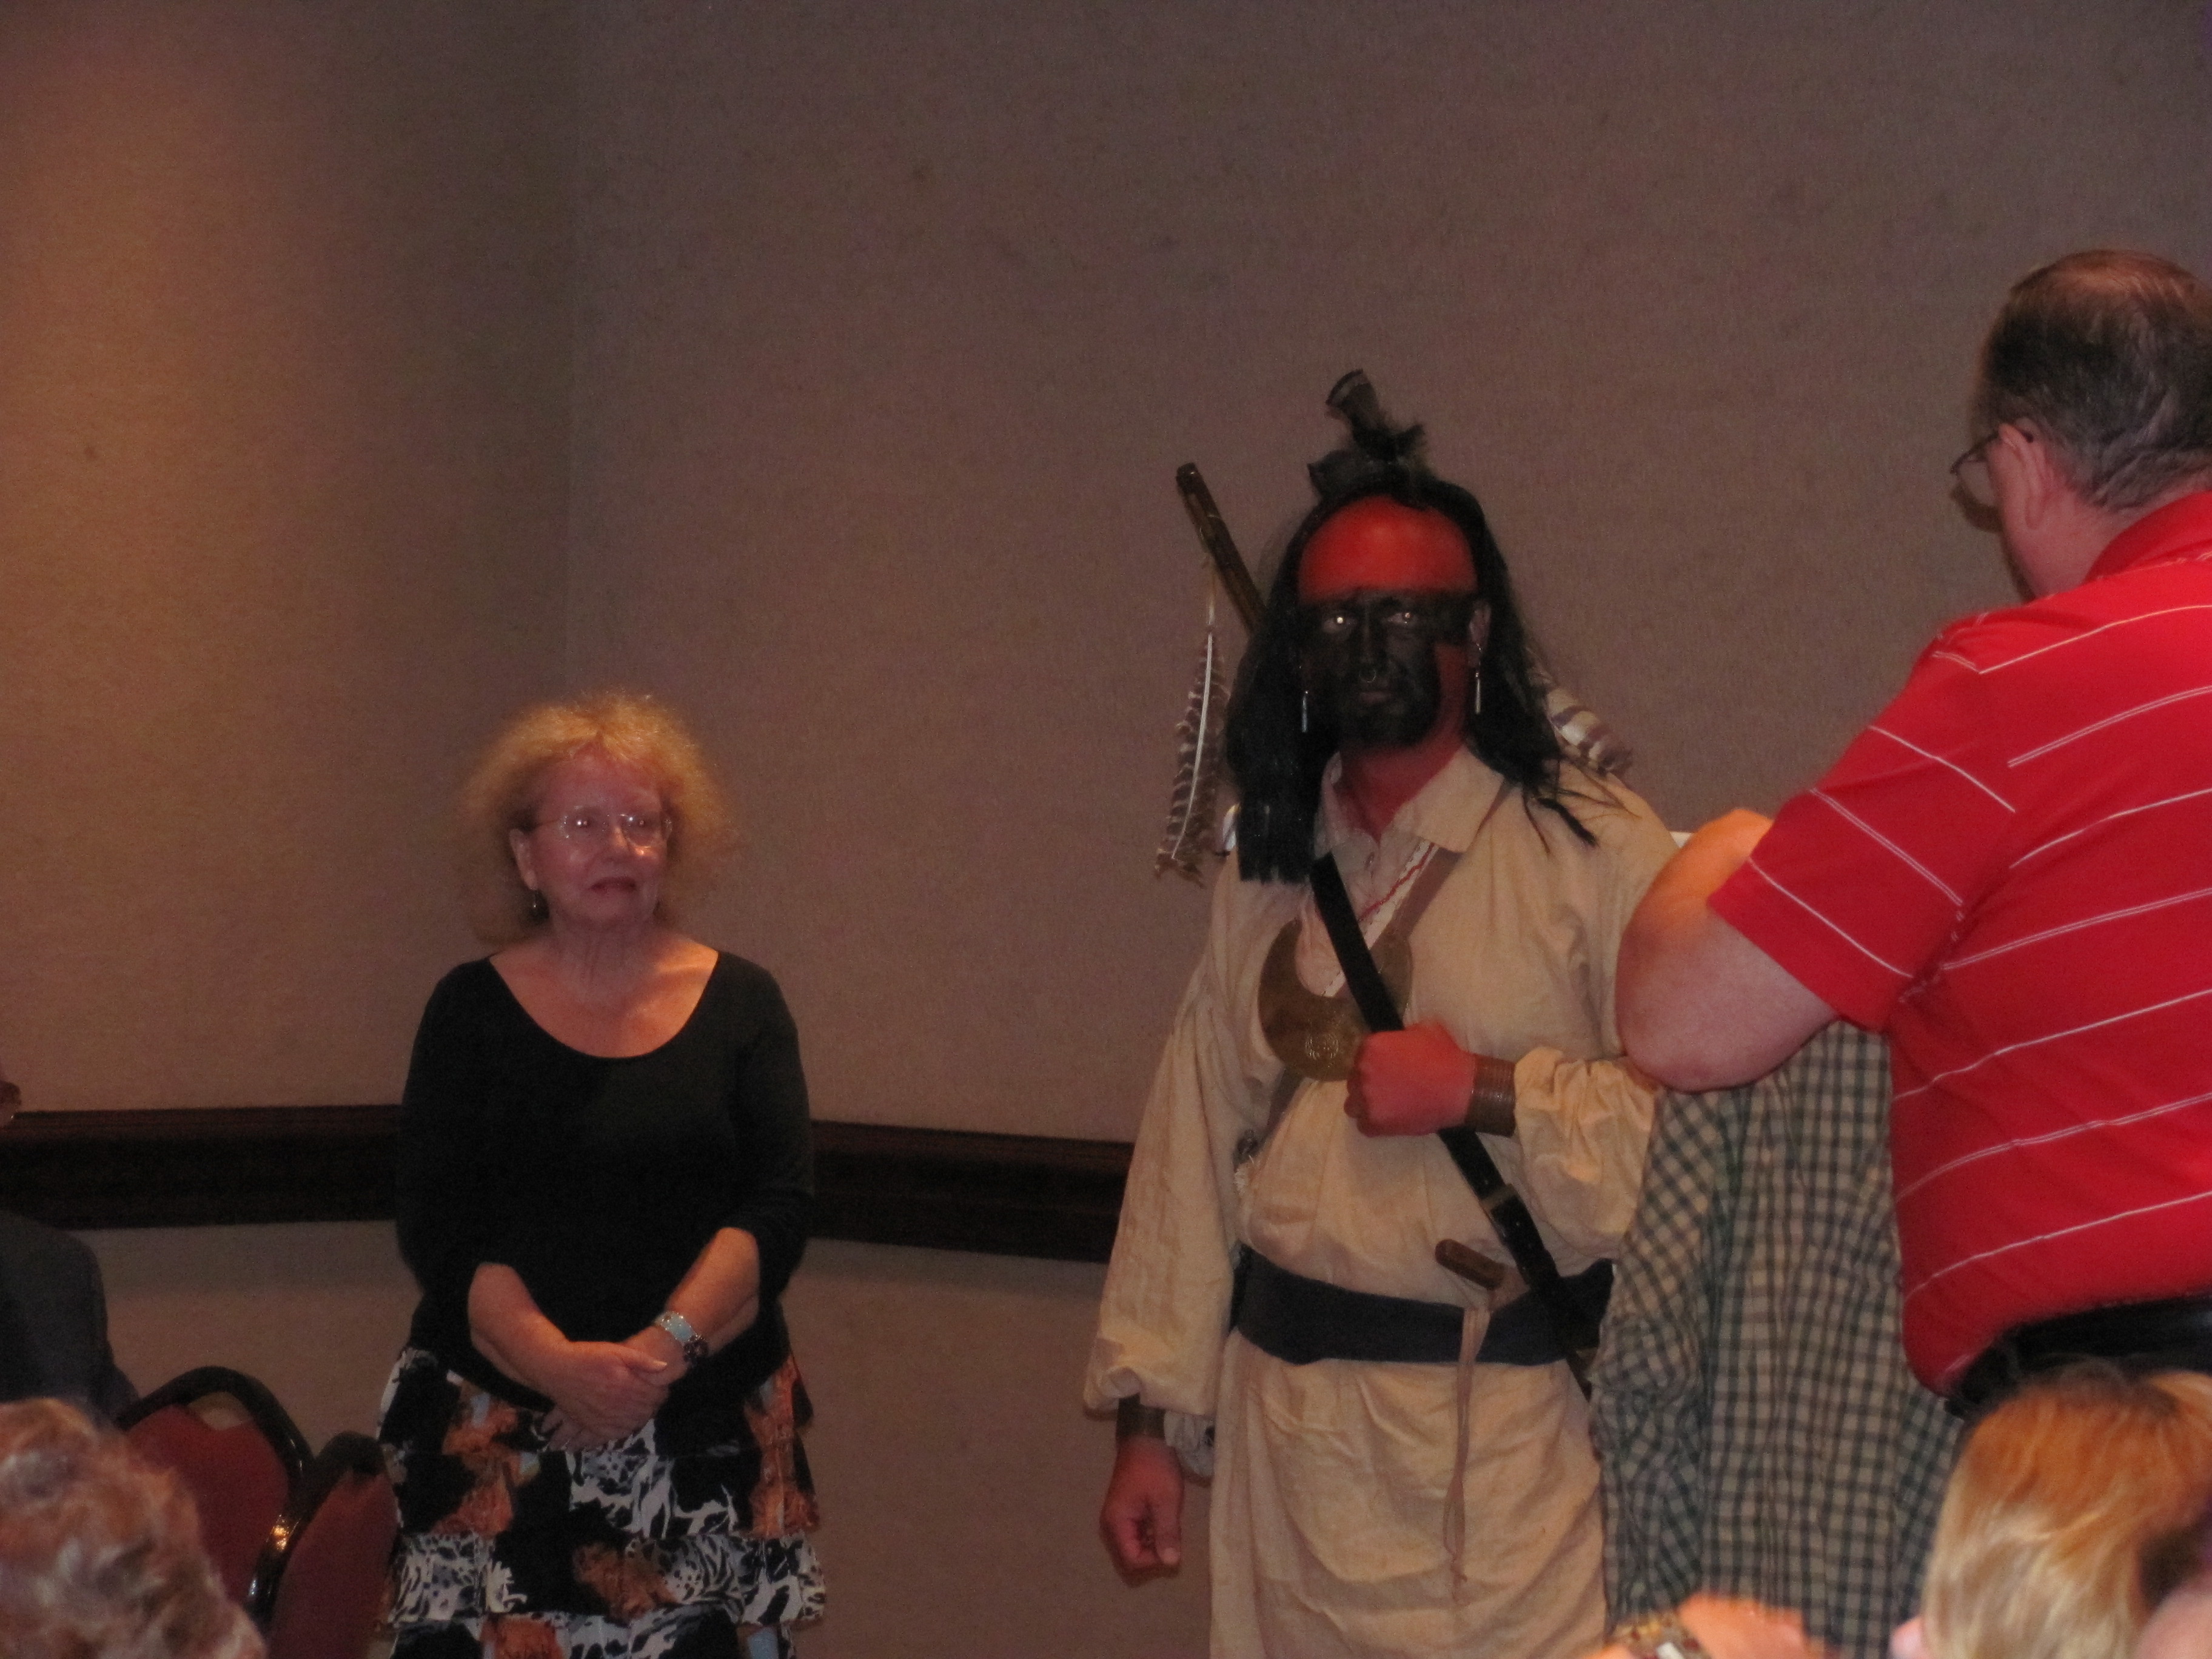 2010 OFHS Meeting in Knoxville, TN (Chief Dragging Canoe "Joe Guy" holding Sheila hostage